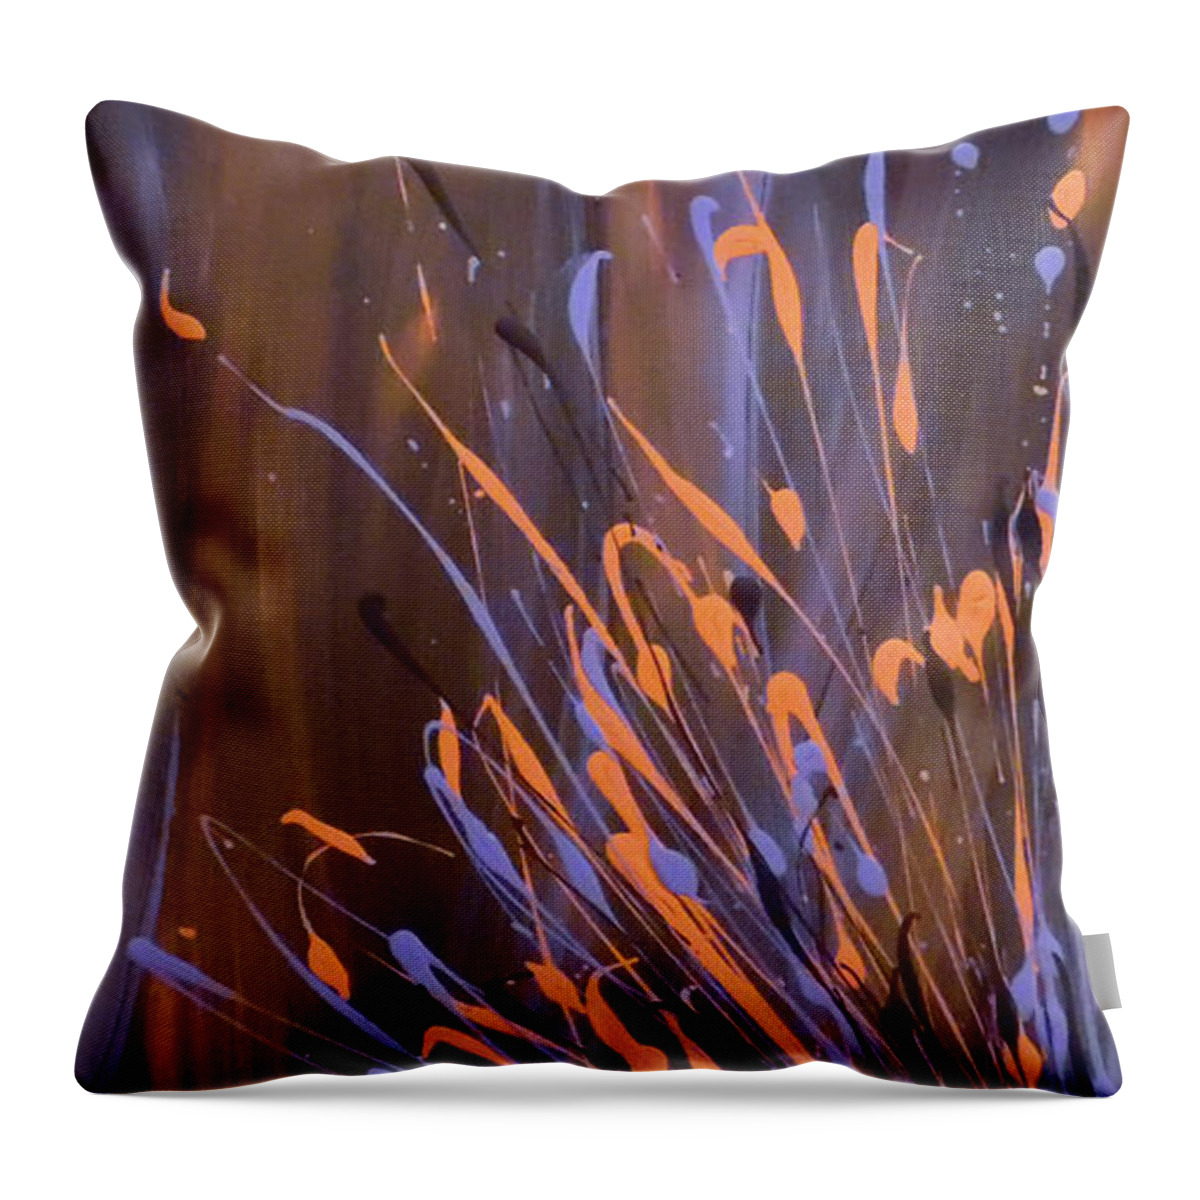 Action Abstract Throw Pillow featuring the painting Revival by Jilian Cramb - AMothersFineArt